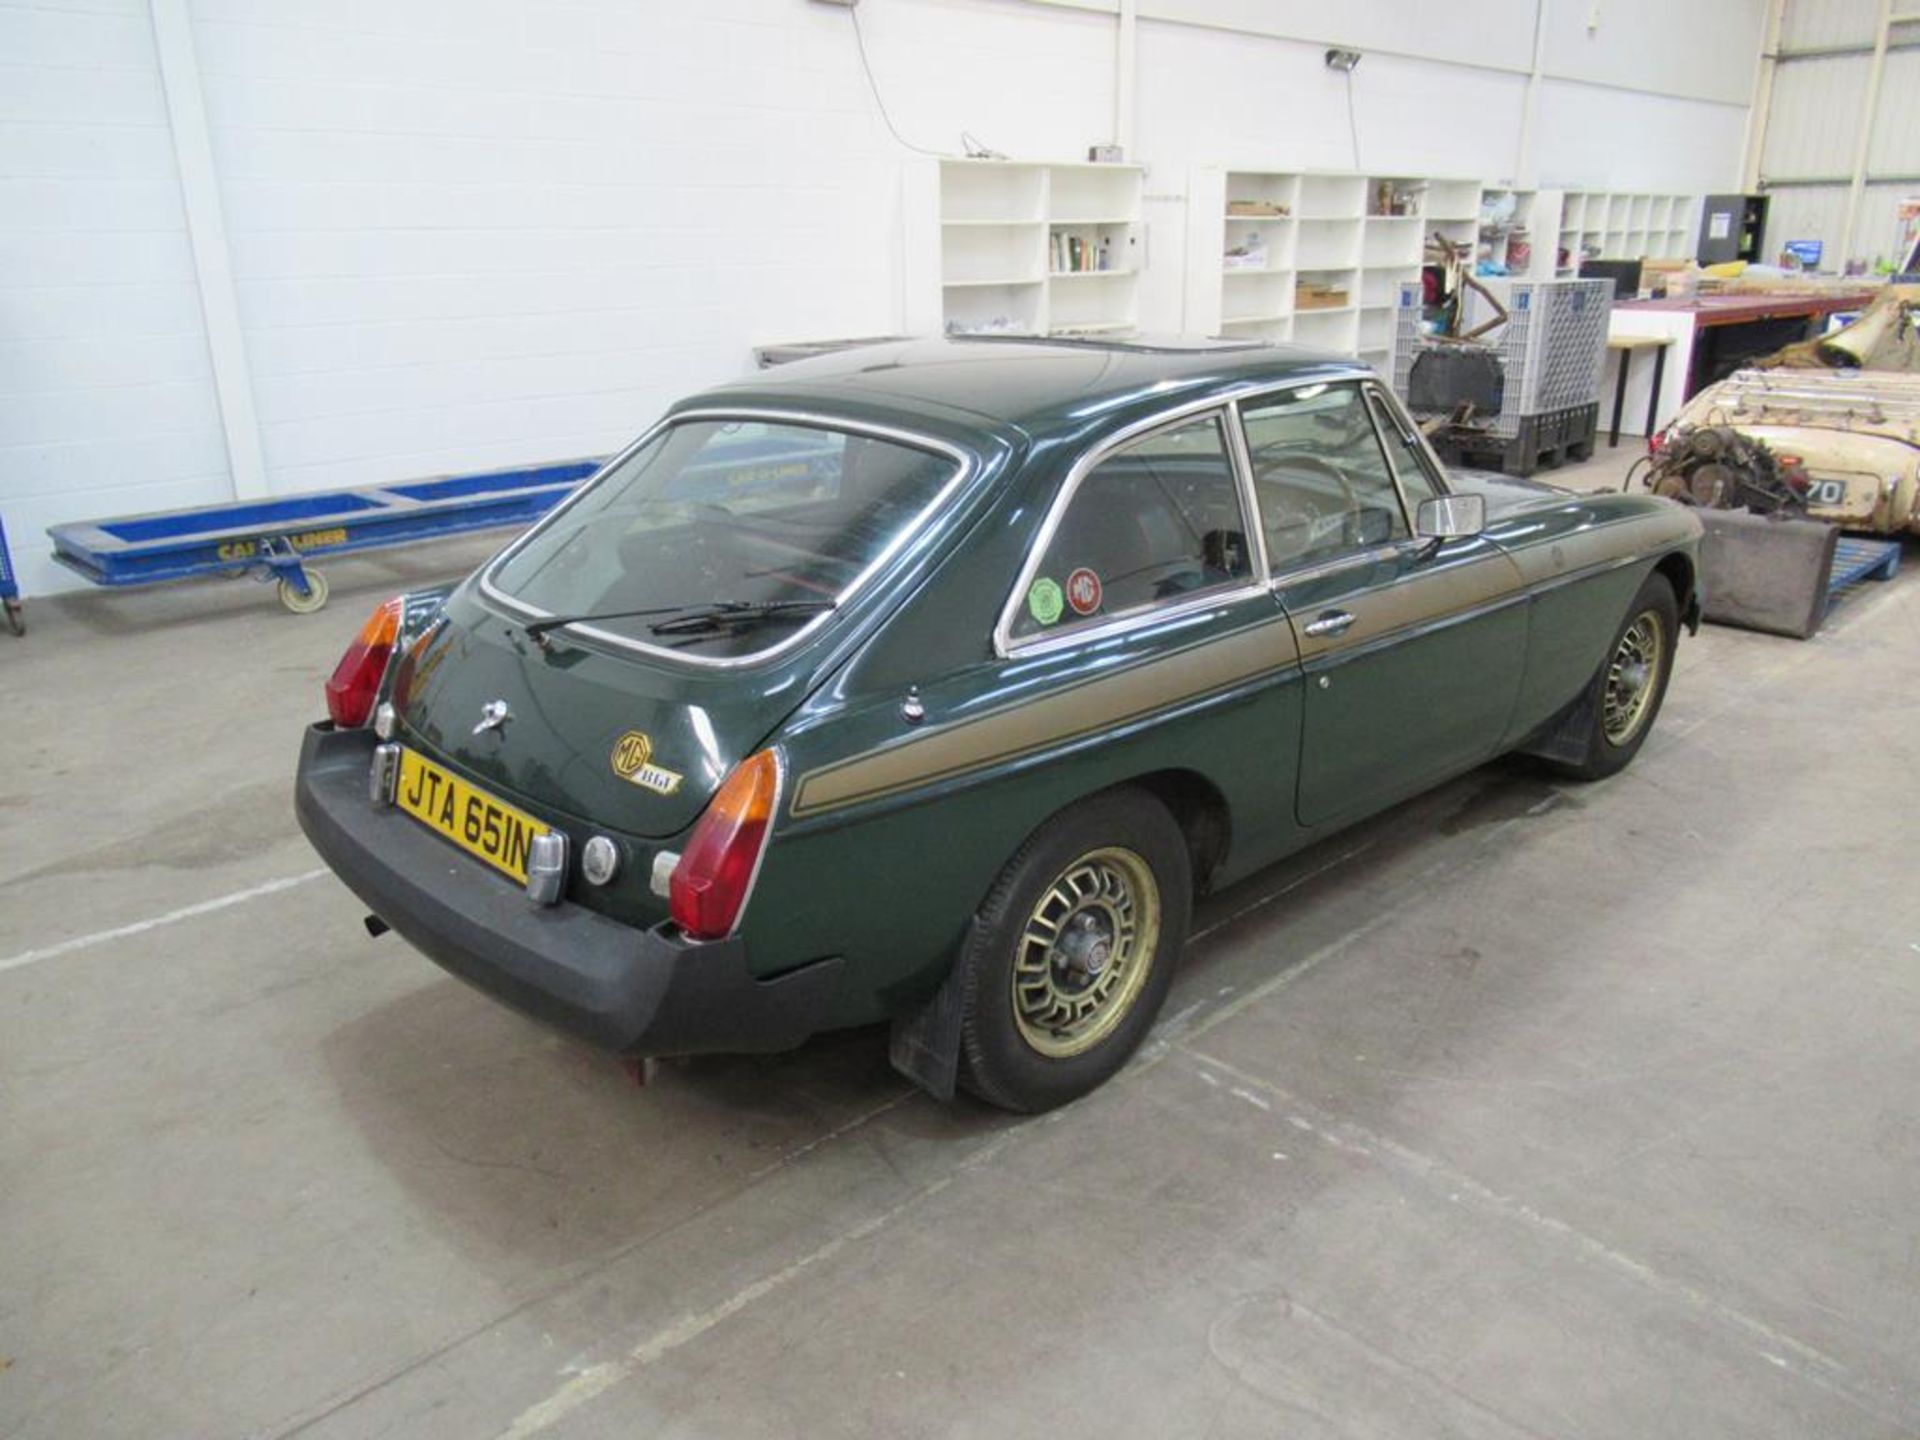 50th Anniversary Edition MG B GT - first registered 1975 - Image 4 of 33